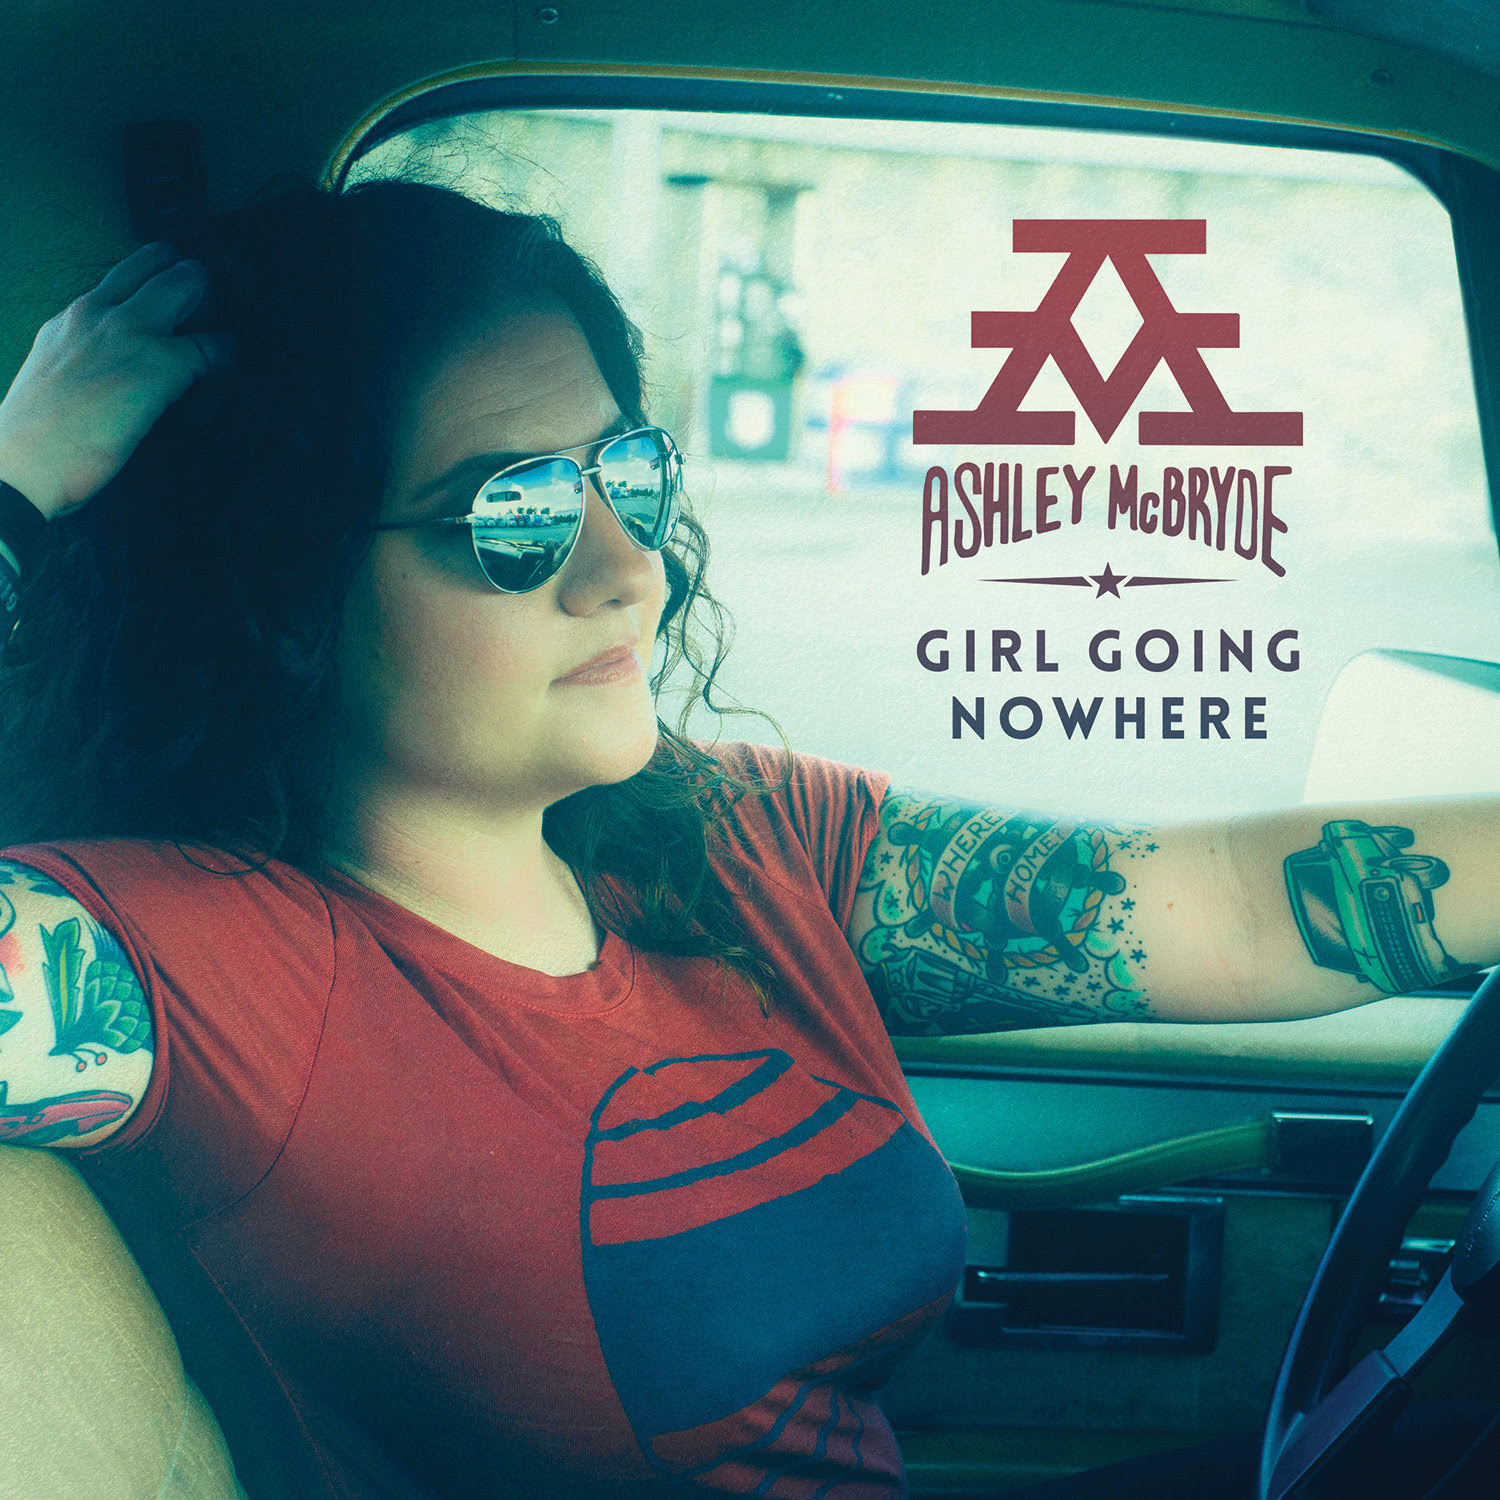 Ashley McBryde’s New Album is the Biggest Debut by a Solo Country Artist This Year